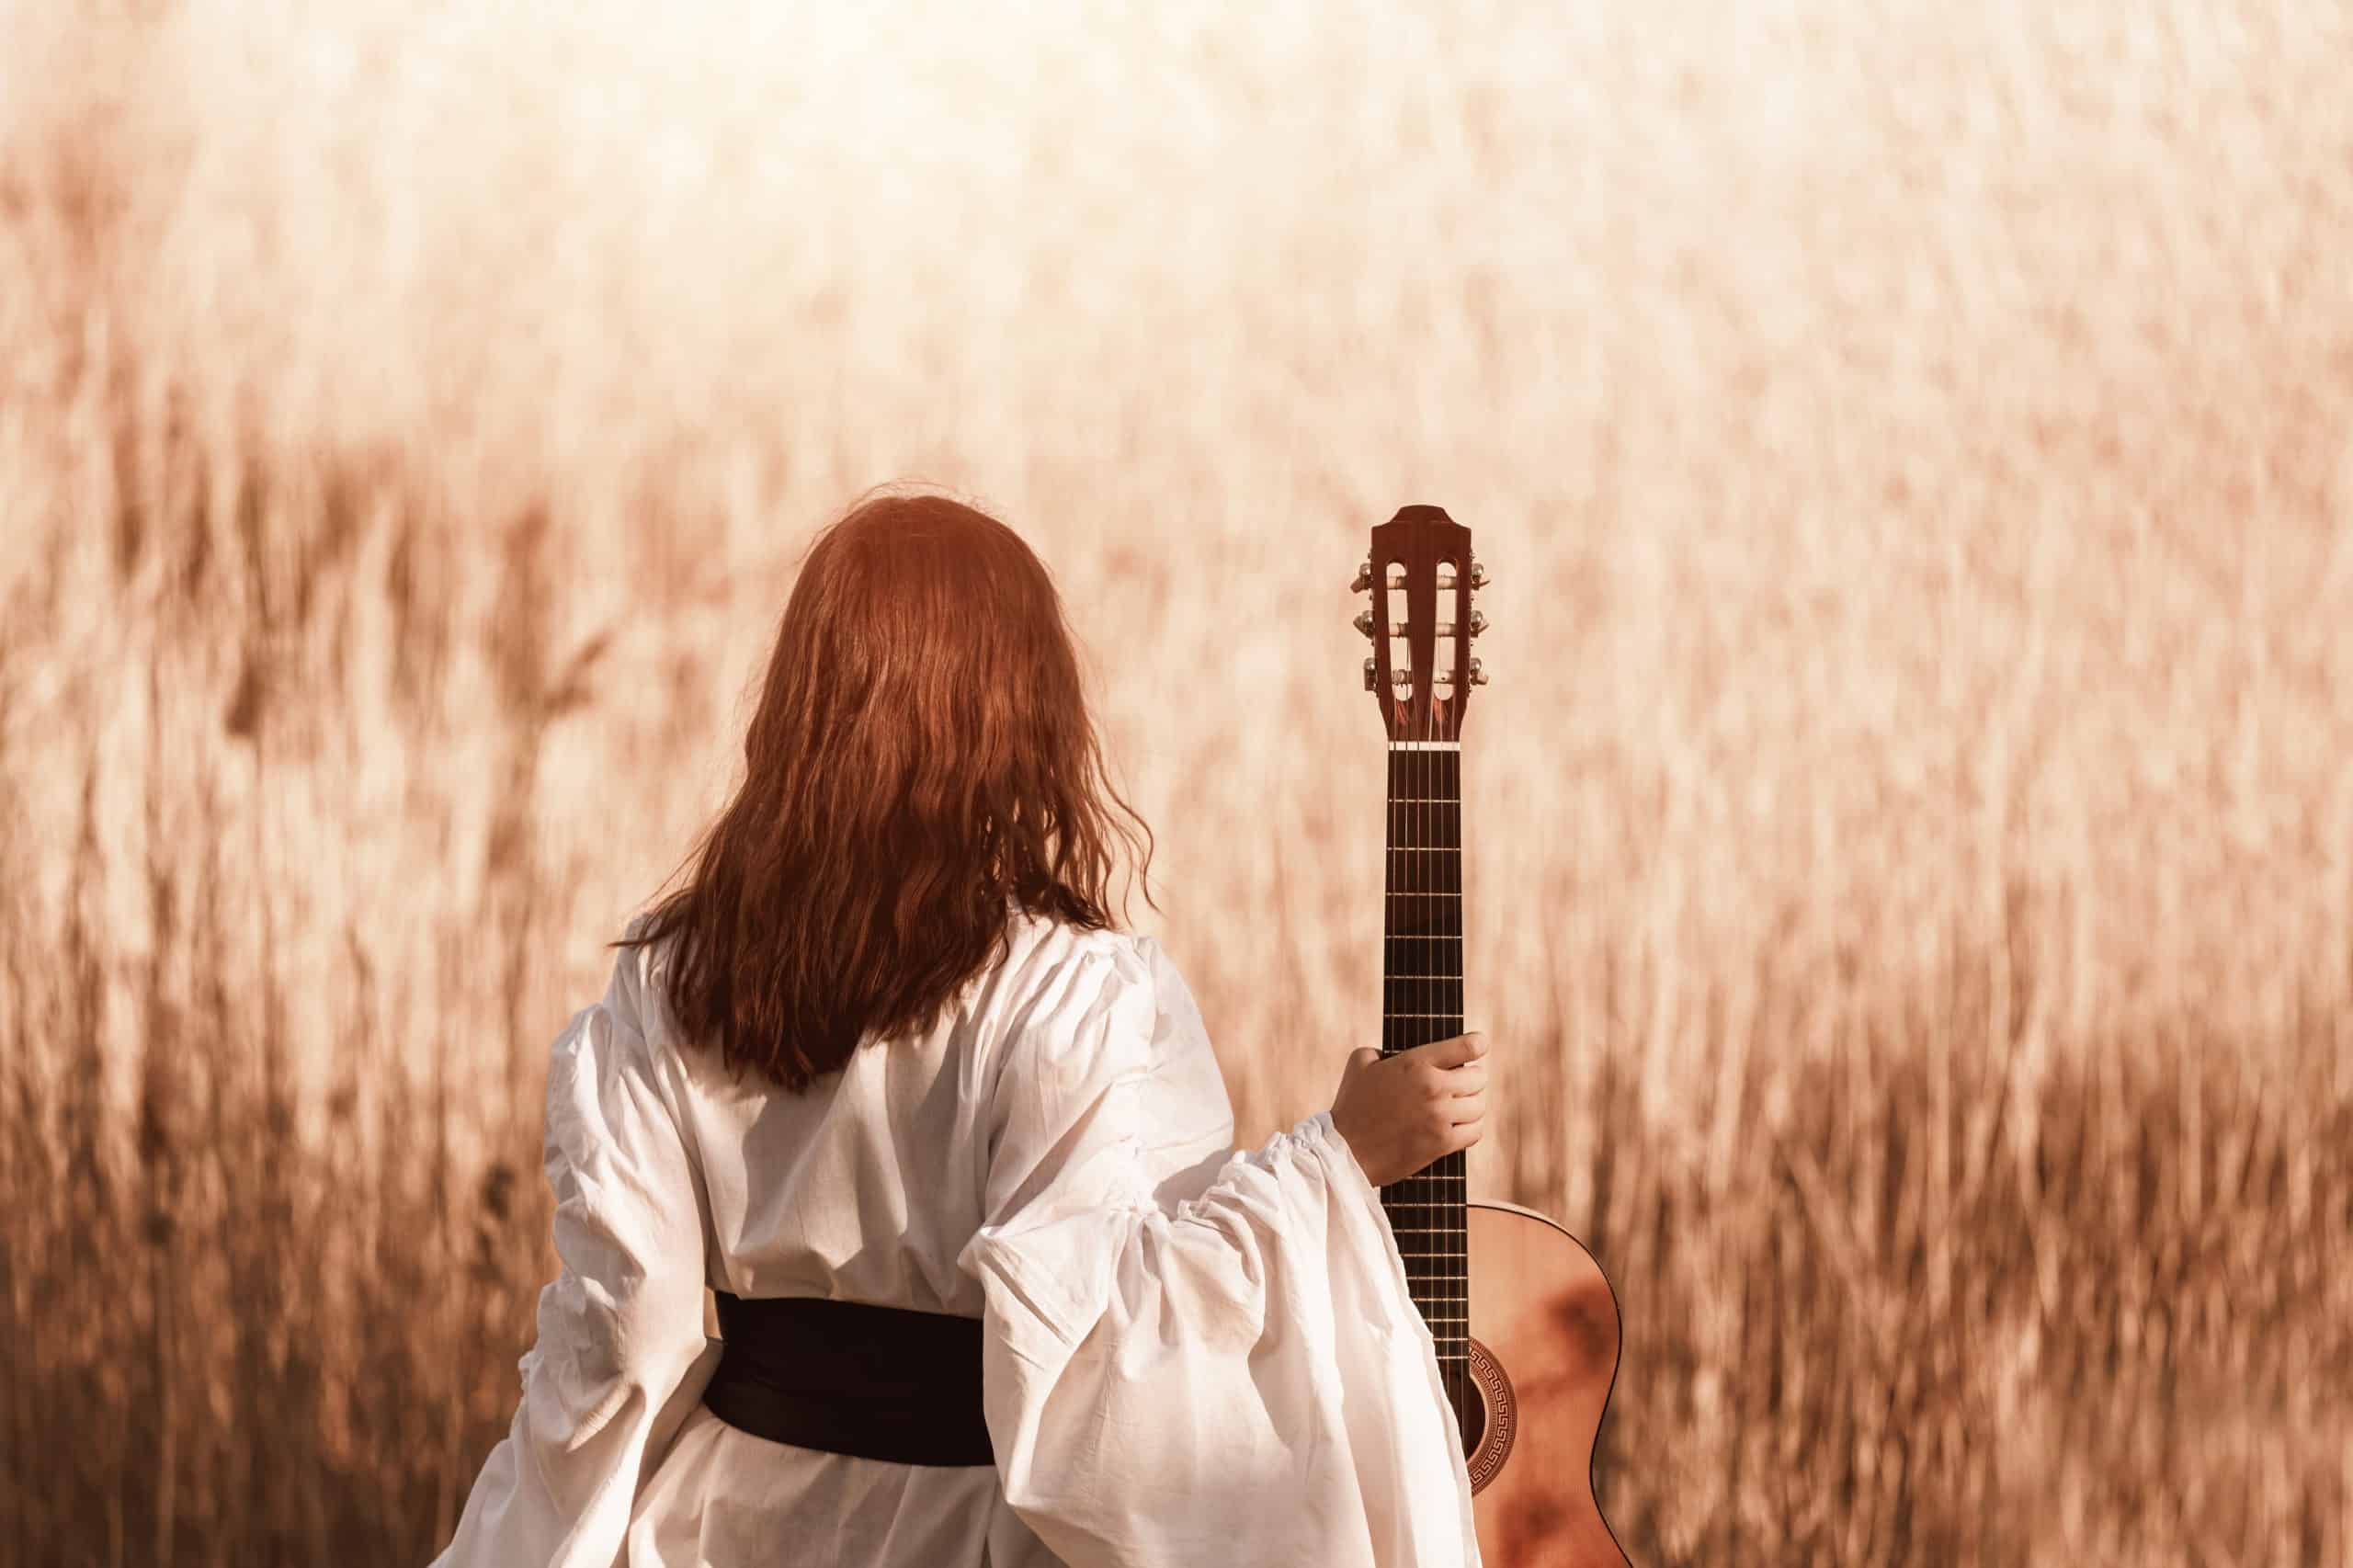 Beautiful young woman with red hair in a white medieval dress holding guitar and walking through the sunny field at warm light of sunset.